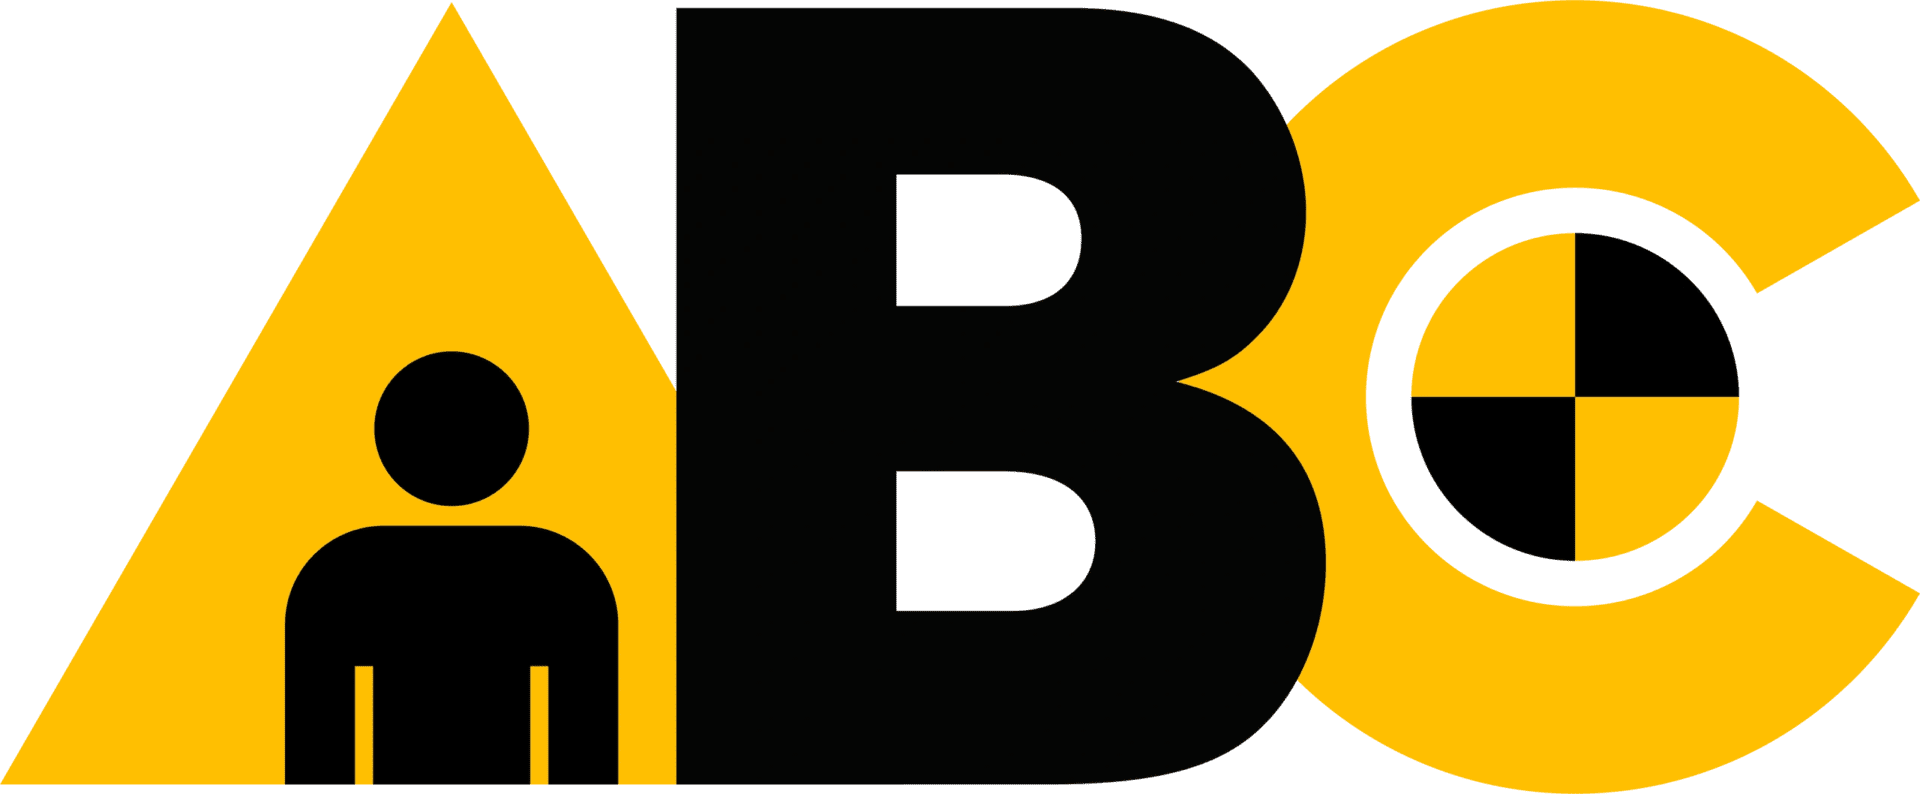 A black and yellow letter b on top of a green background.